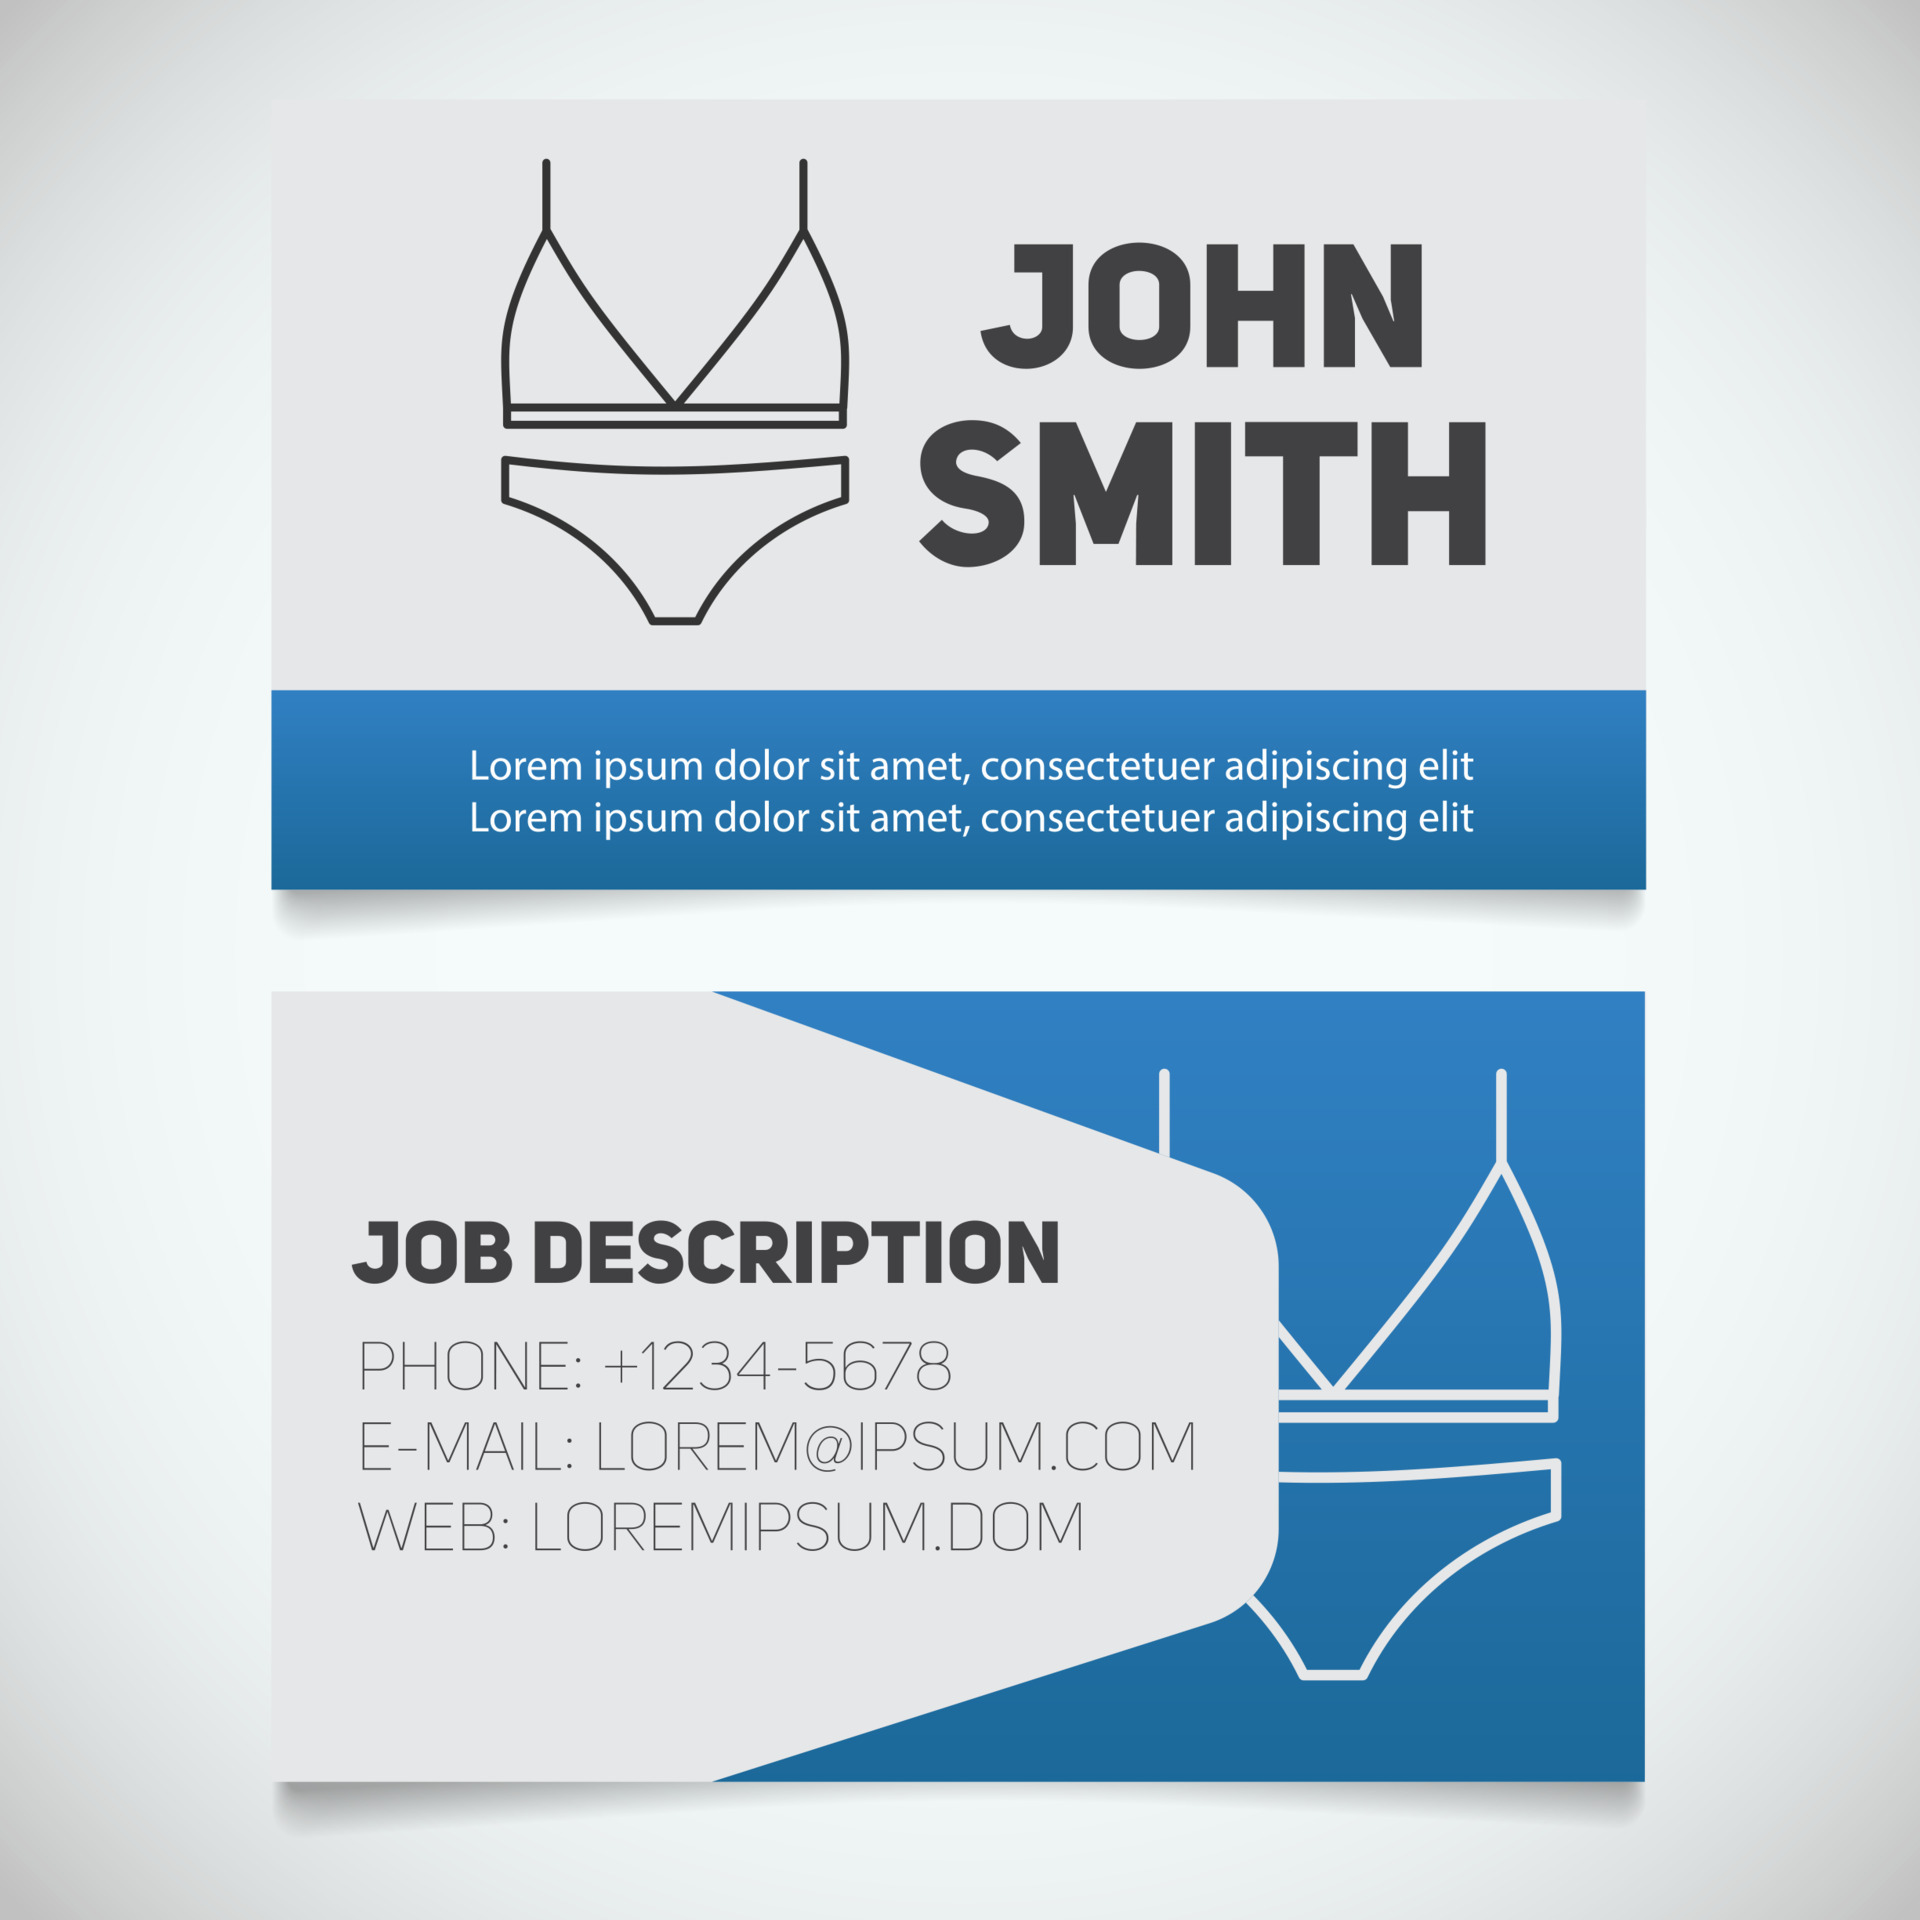 https://static.vecteezy.com/system/resources/previews/004/459/081/original/business-card-print-template-with-bra-and-panties-logo-women-s-underwear-shop-stationery-design-concept-illustration-vector.jpg